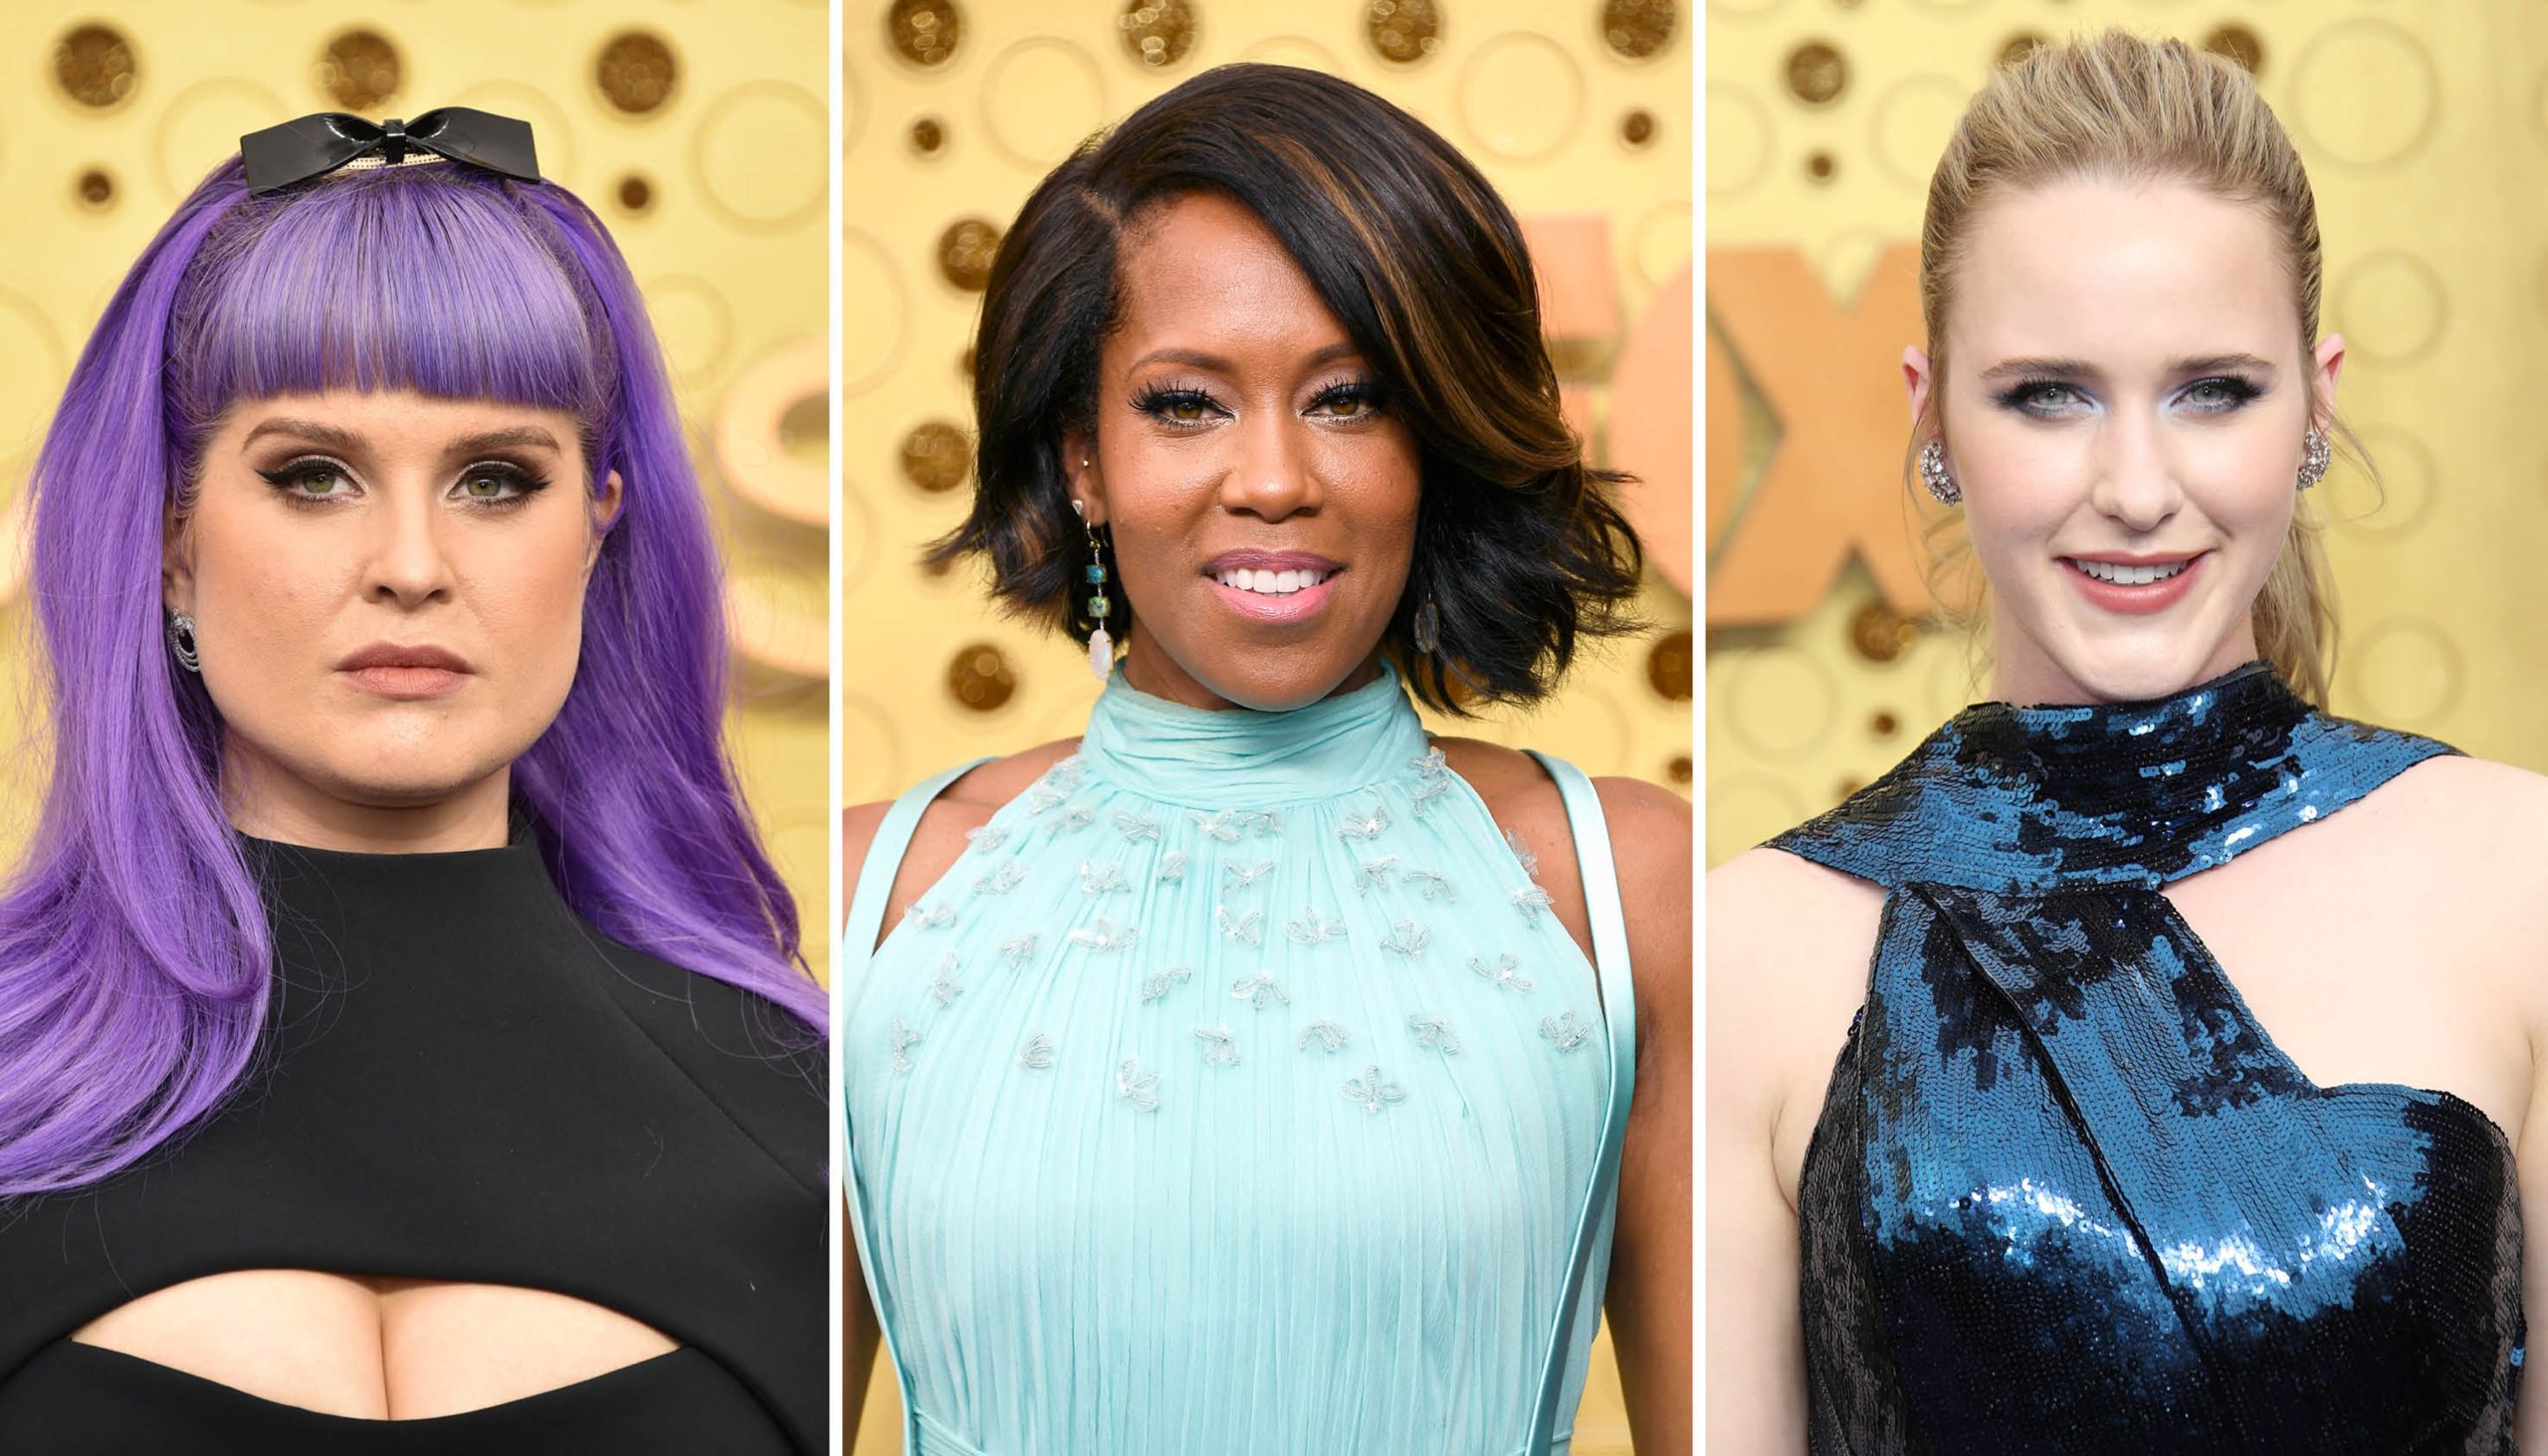 Emmys 2020: The Best Hair and Makeup Looks at the Virtual Event